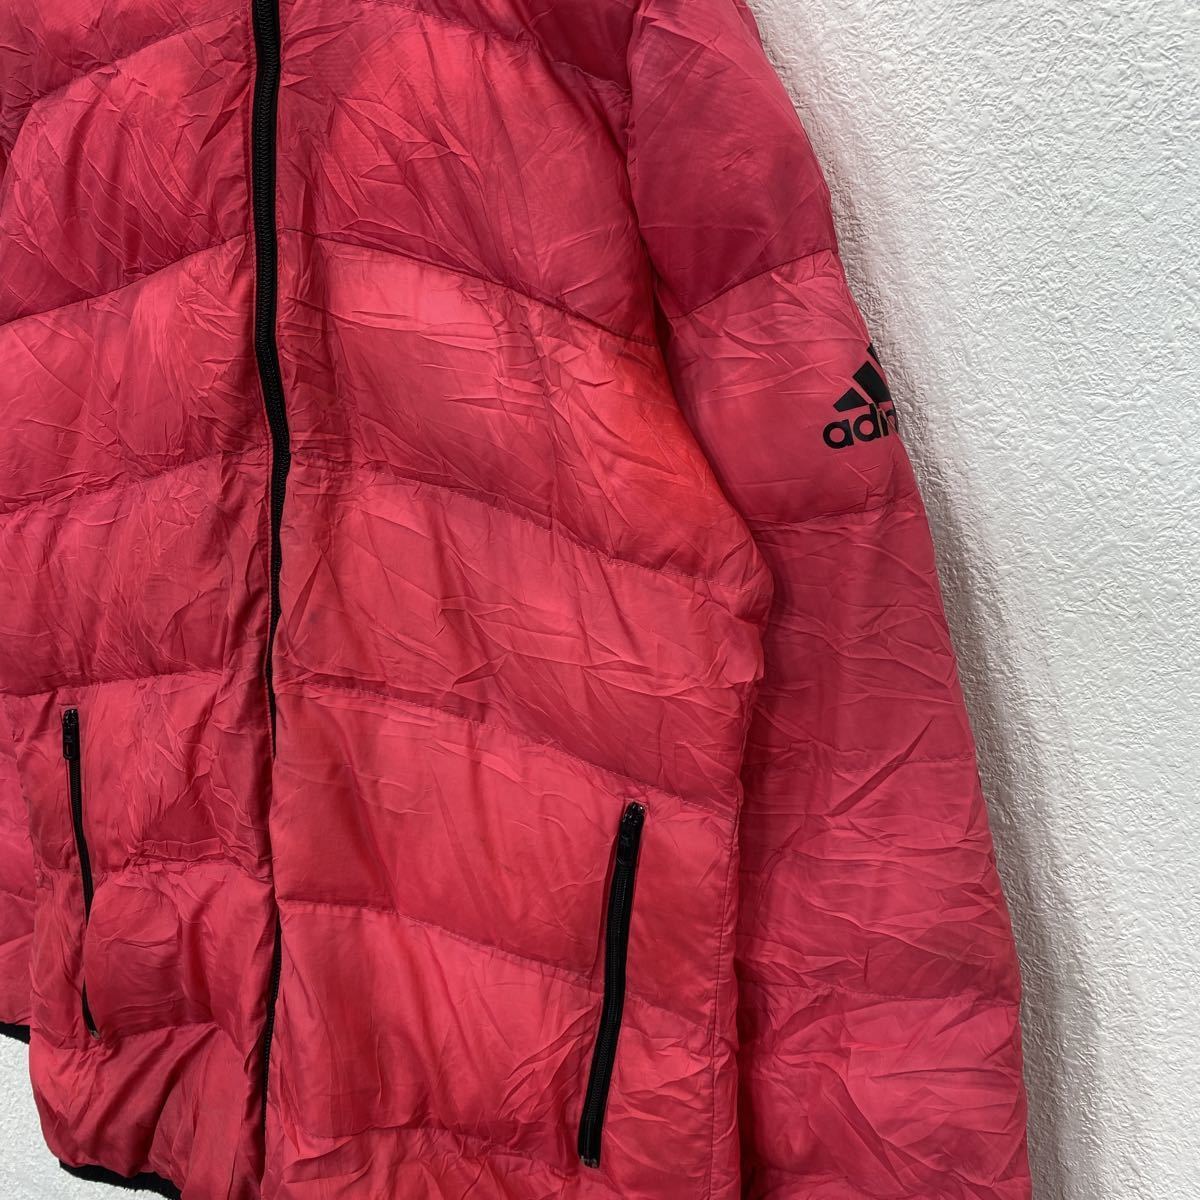 adidas down jacket Kids M pink Adidas Zip up Logo one Point f-ti old clothes . America buying up t2201-3105